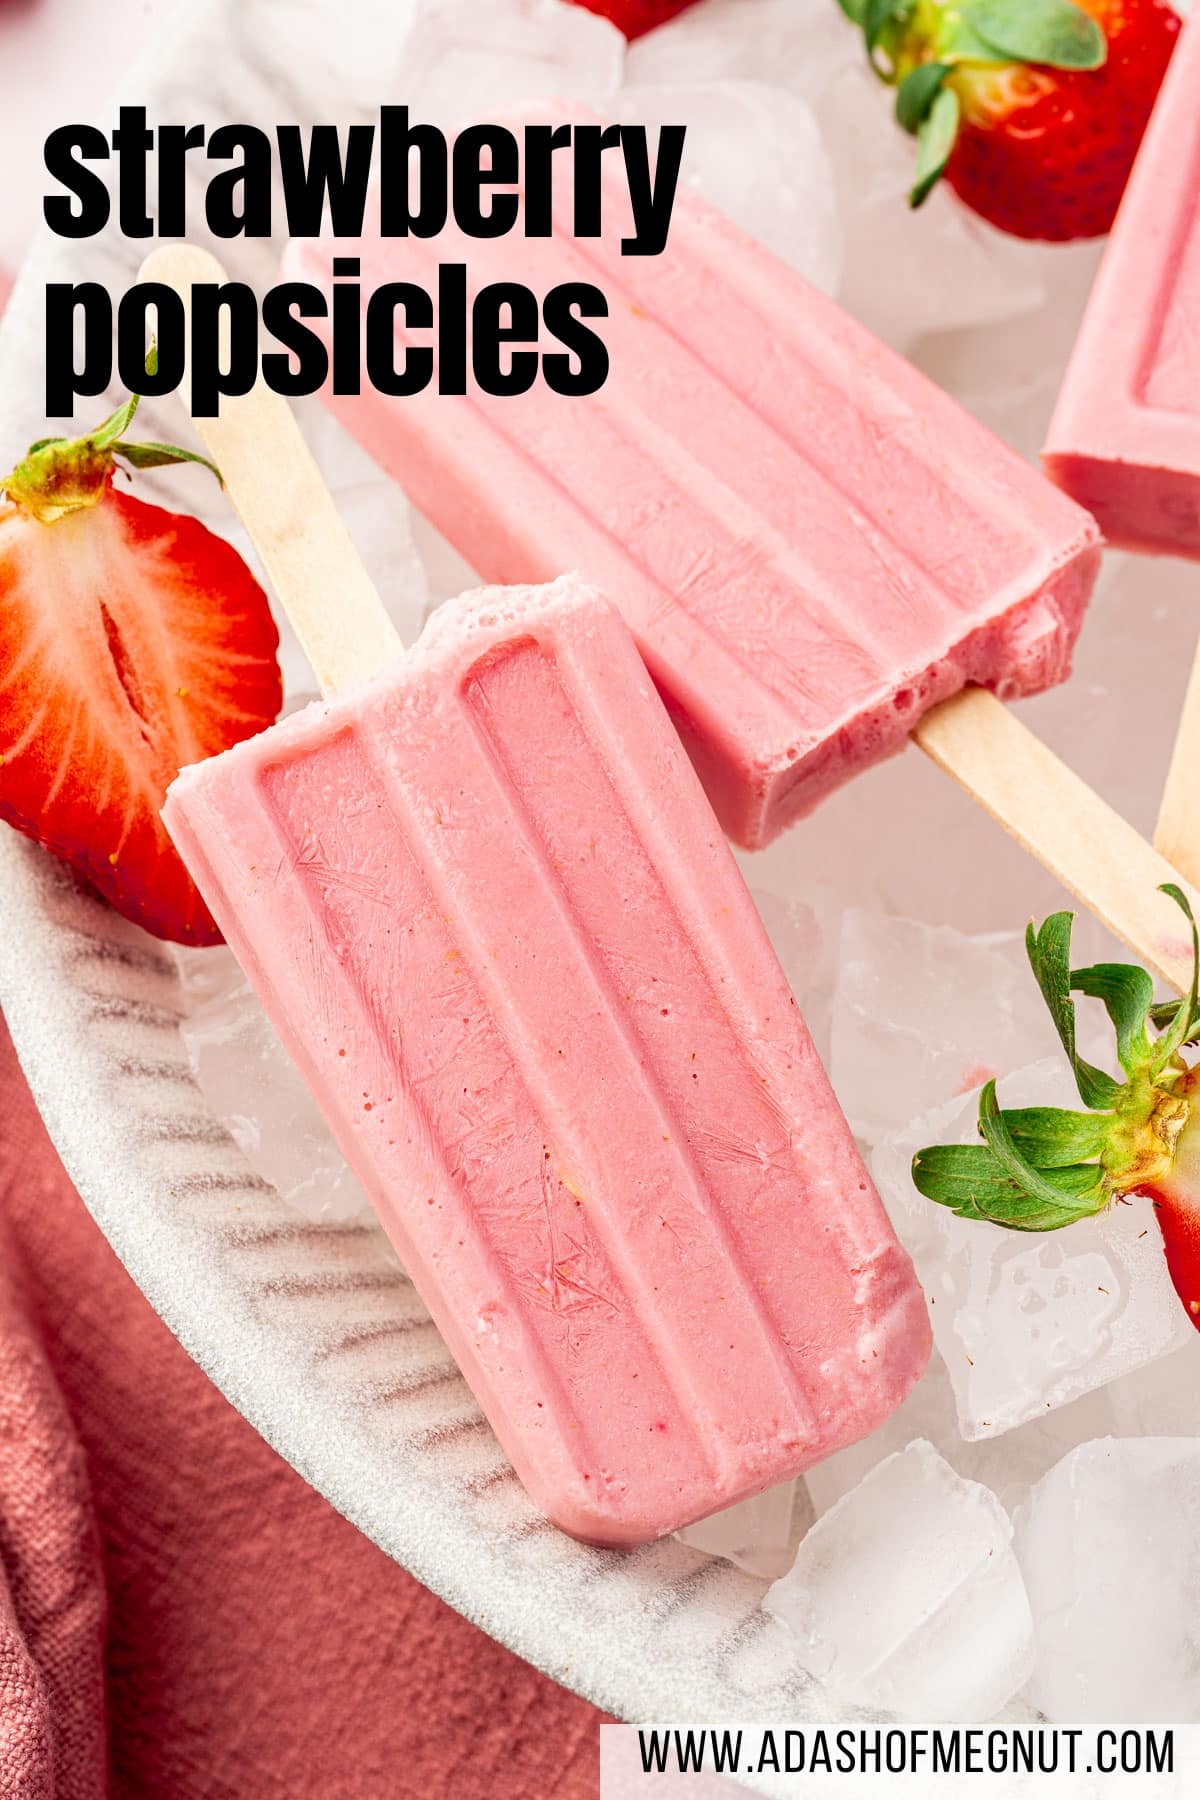 A close up of a strawberry popsicle laying in a large bowl of ice cubes with some fresh strawberry halves surrounding the popsicles.